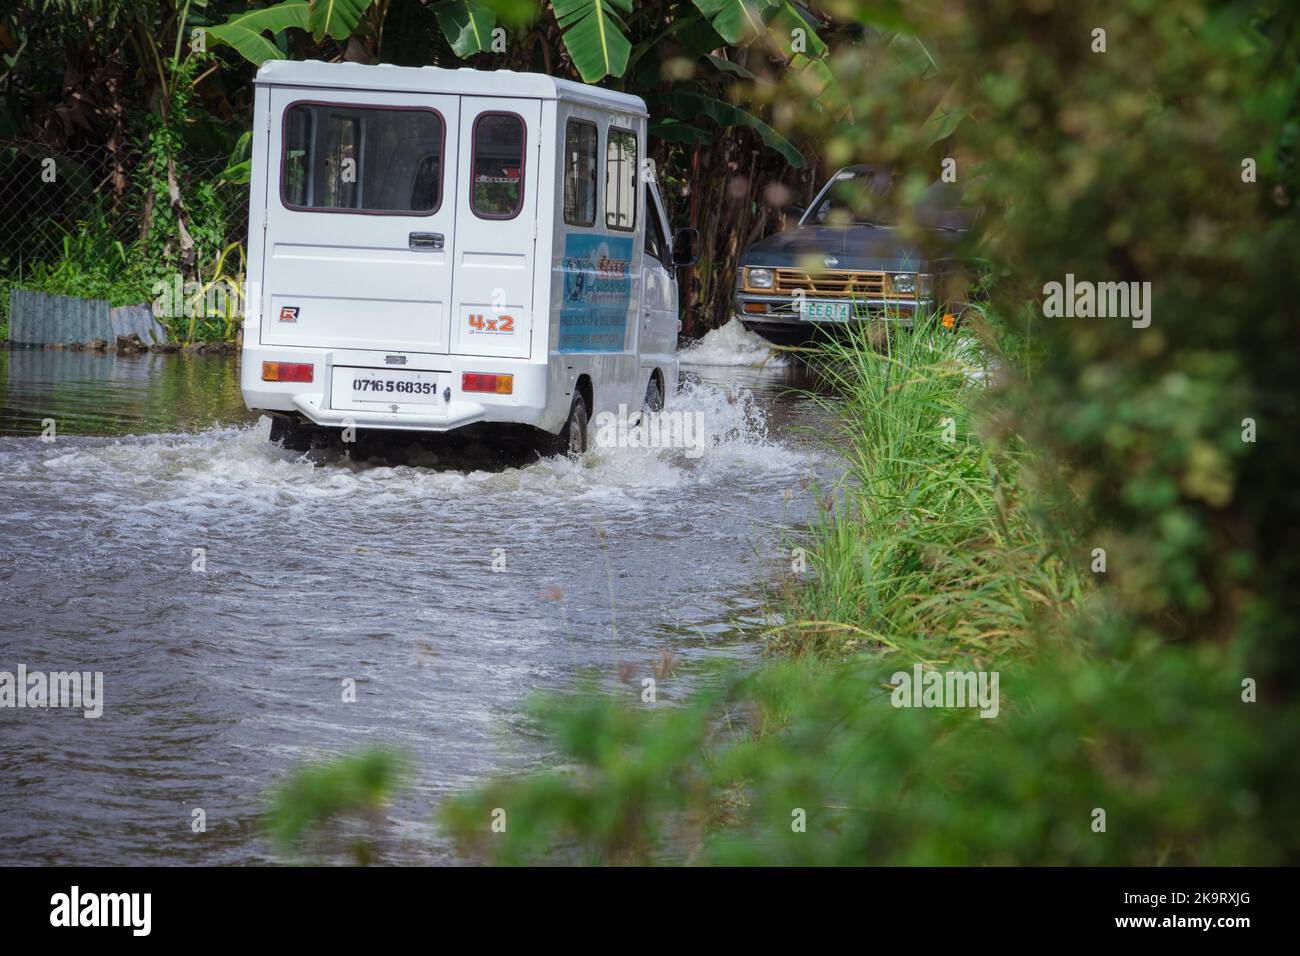 Severe tropical storm Paeng or Nalgae brought flashfloods and rain to the country. Van travelling on flooded road. Relief operation. Stock Photo